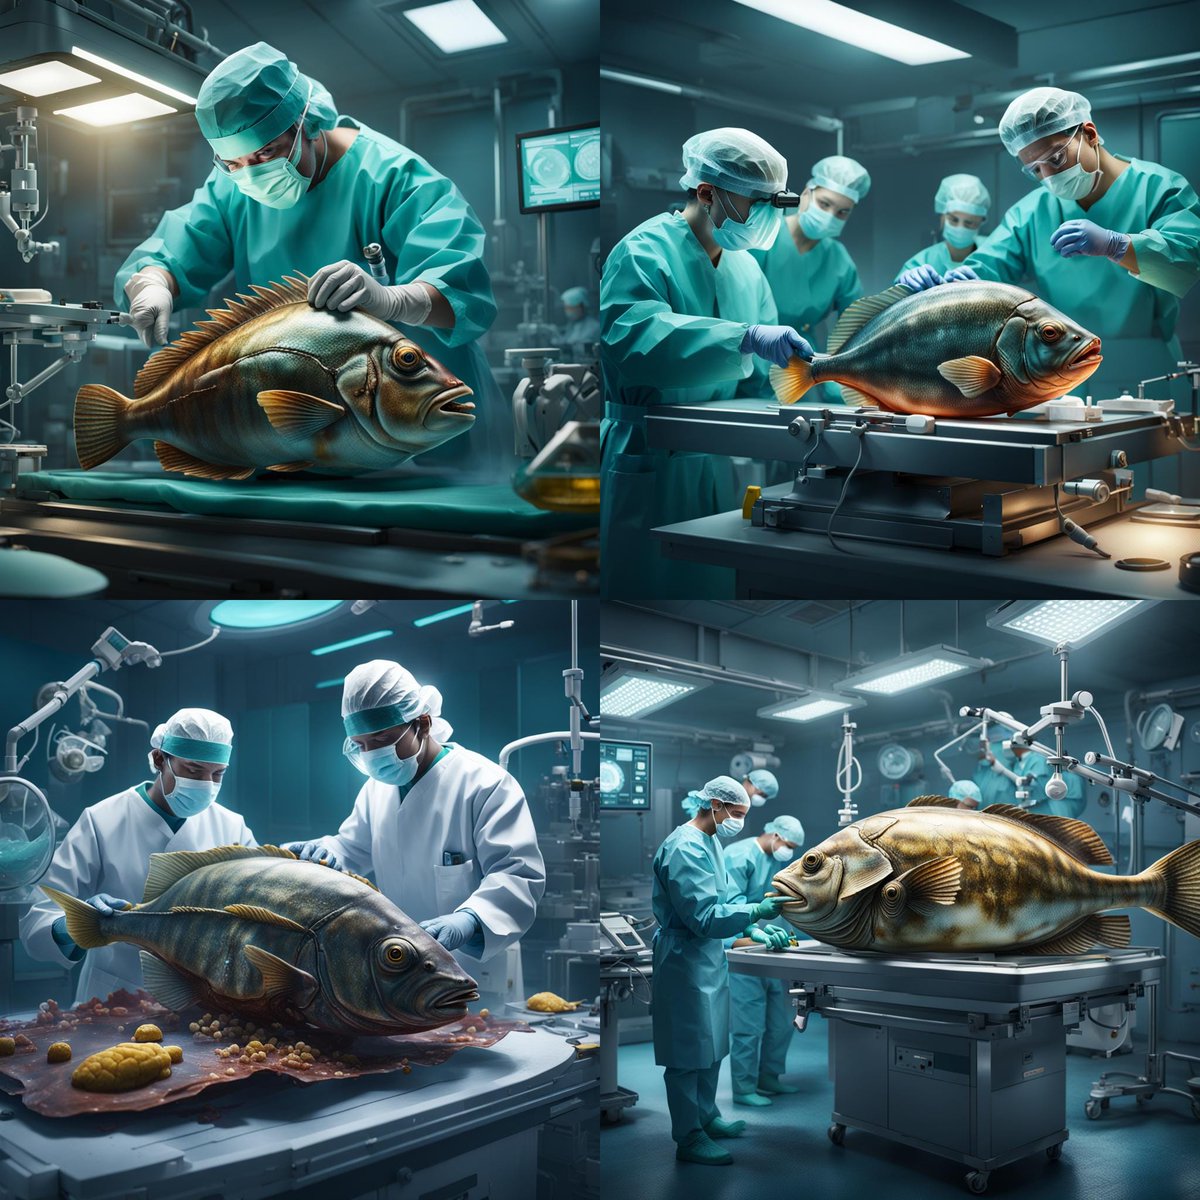 They keep saying it's rare! Surgeons working 28 hours a day to keep on top of the rising numbers of Turbot Cancer